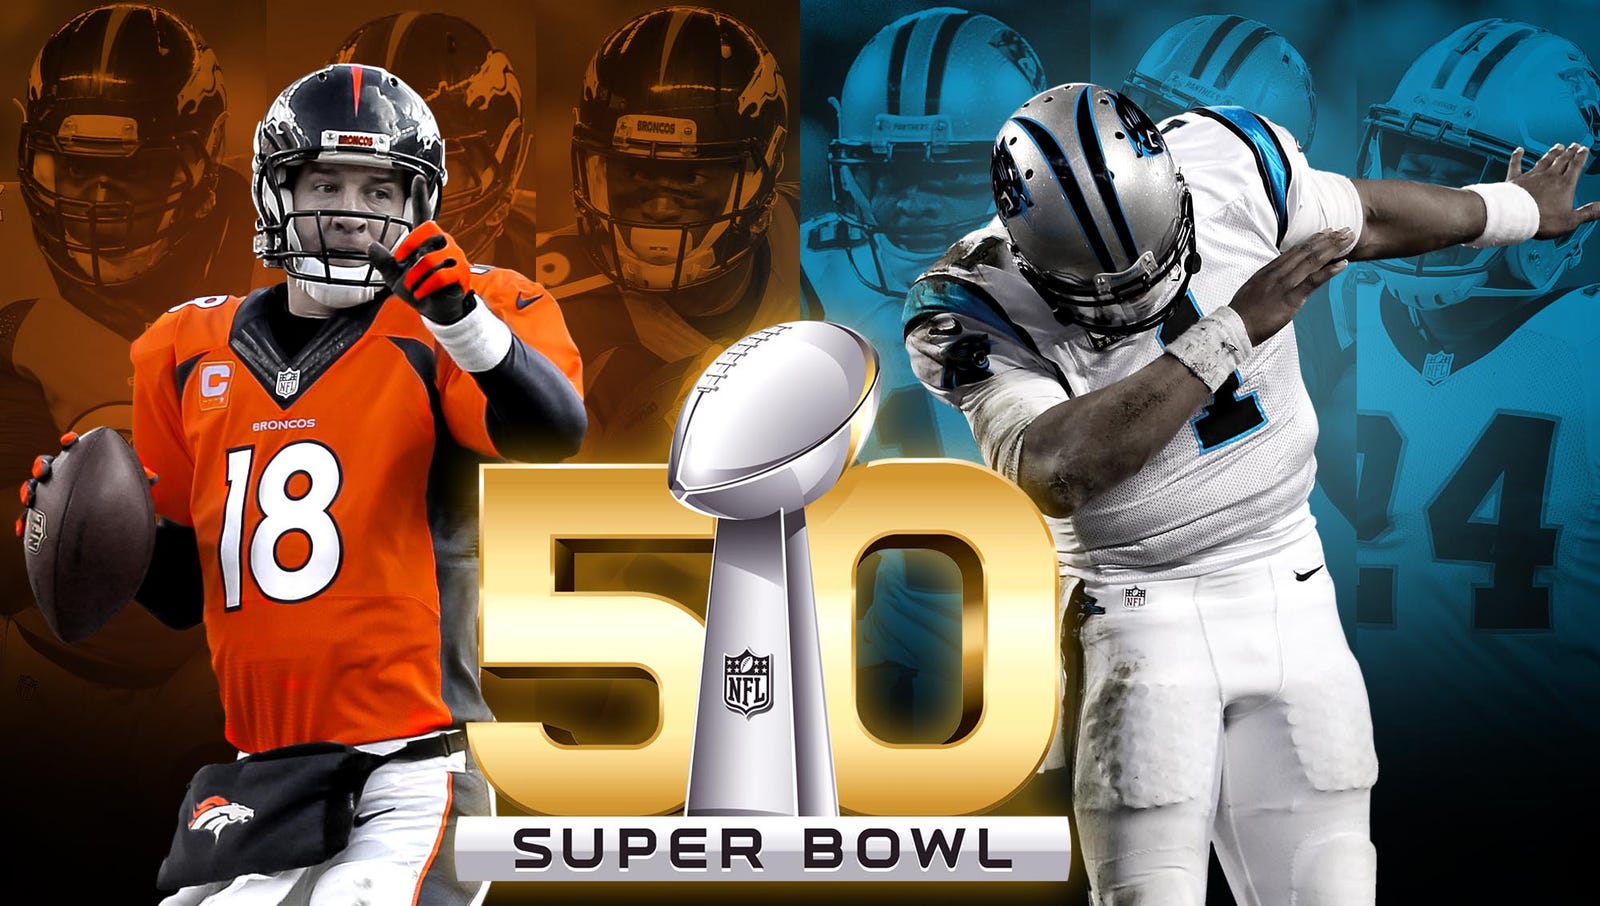 what is super bowl 50